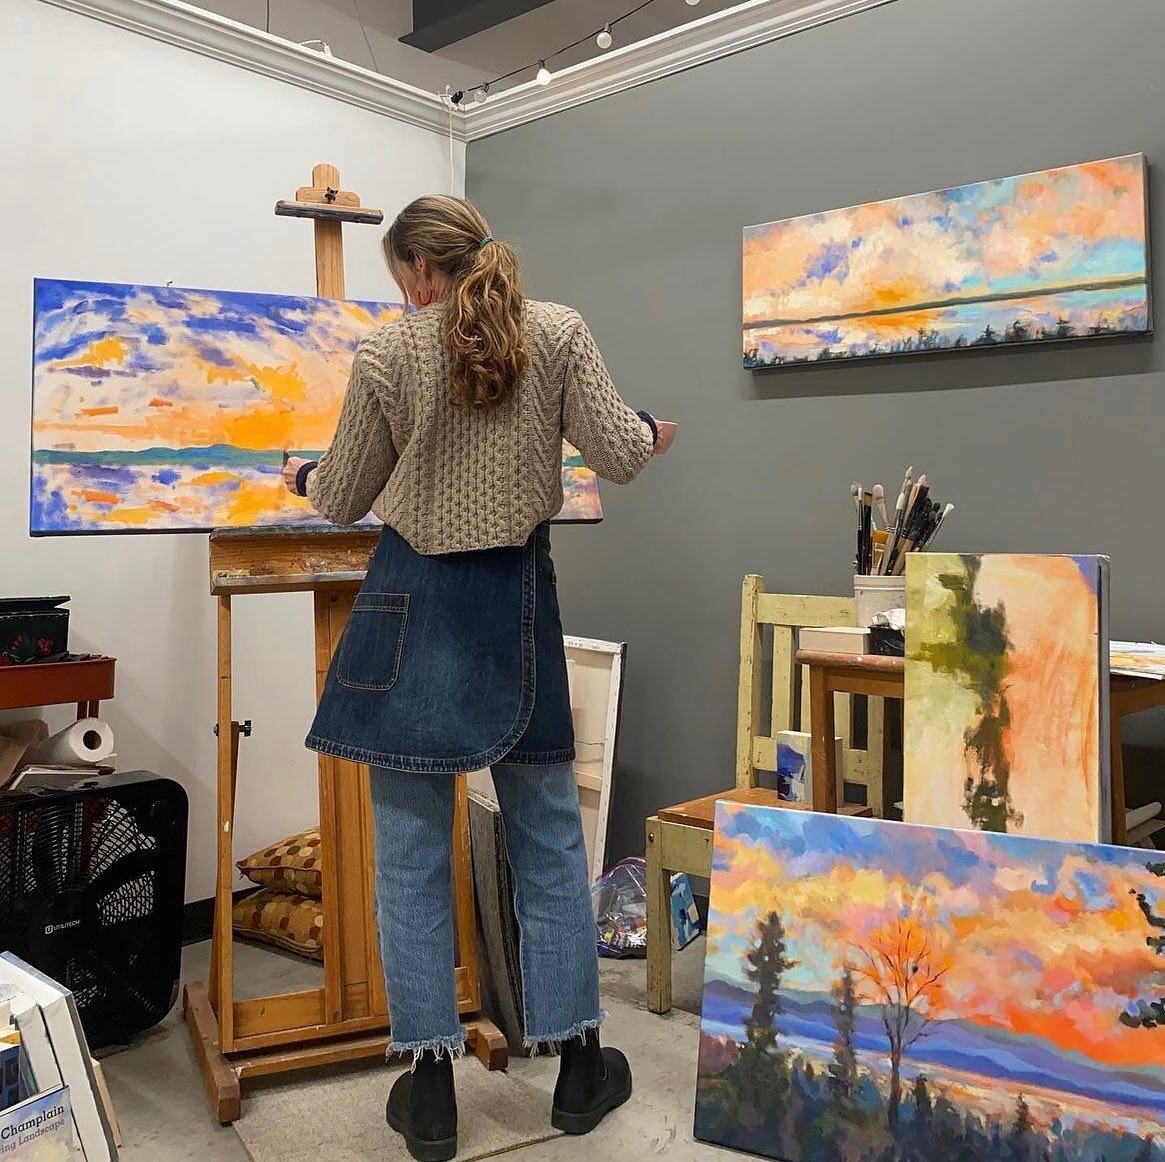 Stop by the Soda Plant for some creative inspiration and to see our artists at work. #repost from the talented @montstreamstudio.

Making hay when the sun shines. 

#gotime #Art #Artist #Oil Painting #ArtStudio #ArtGallery #Landscape Painting #Sunset